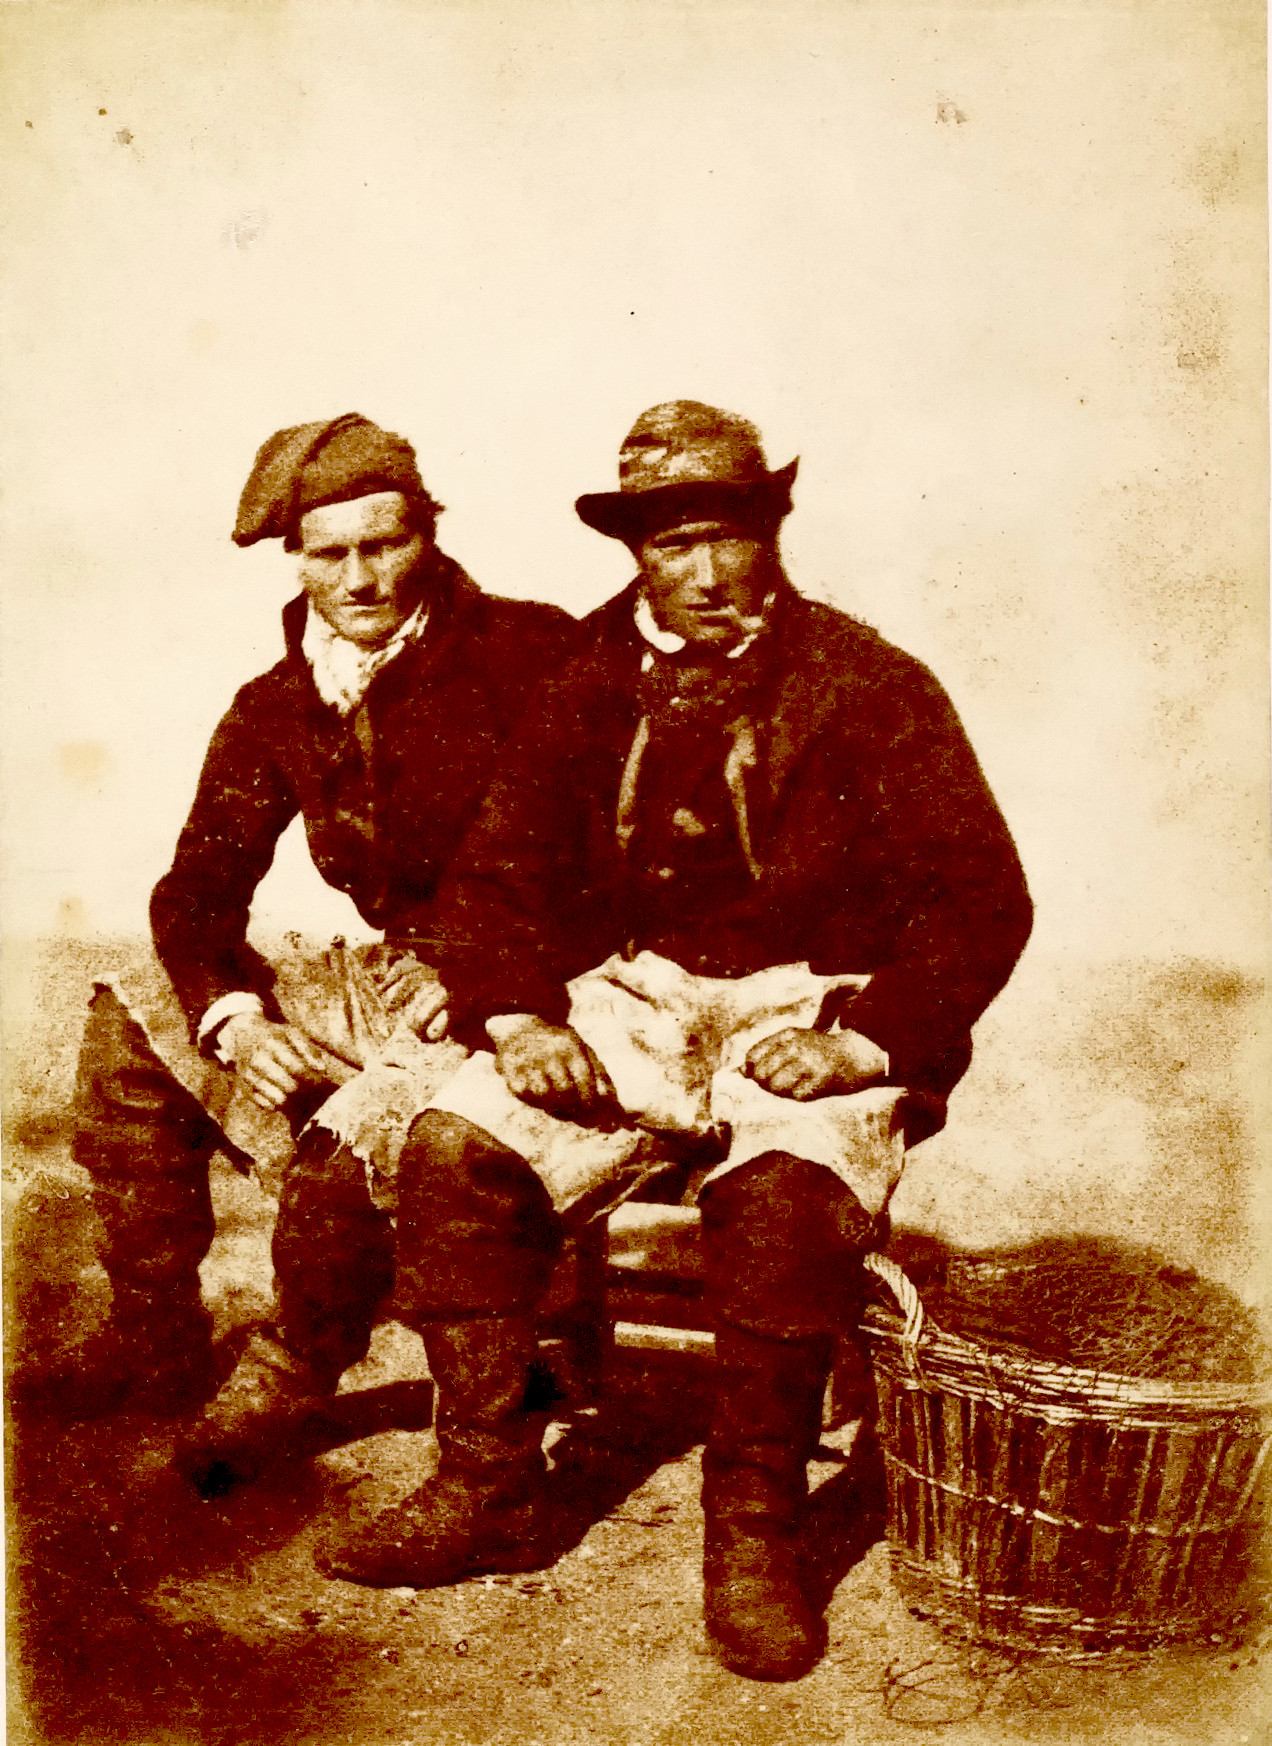 David Young and Unknown Man, Newhaven